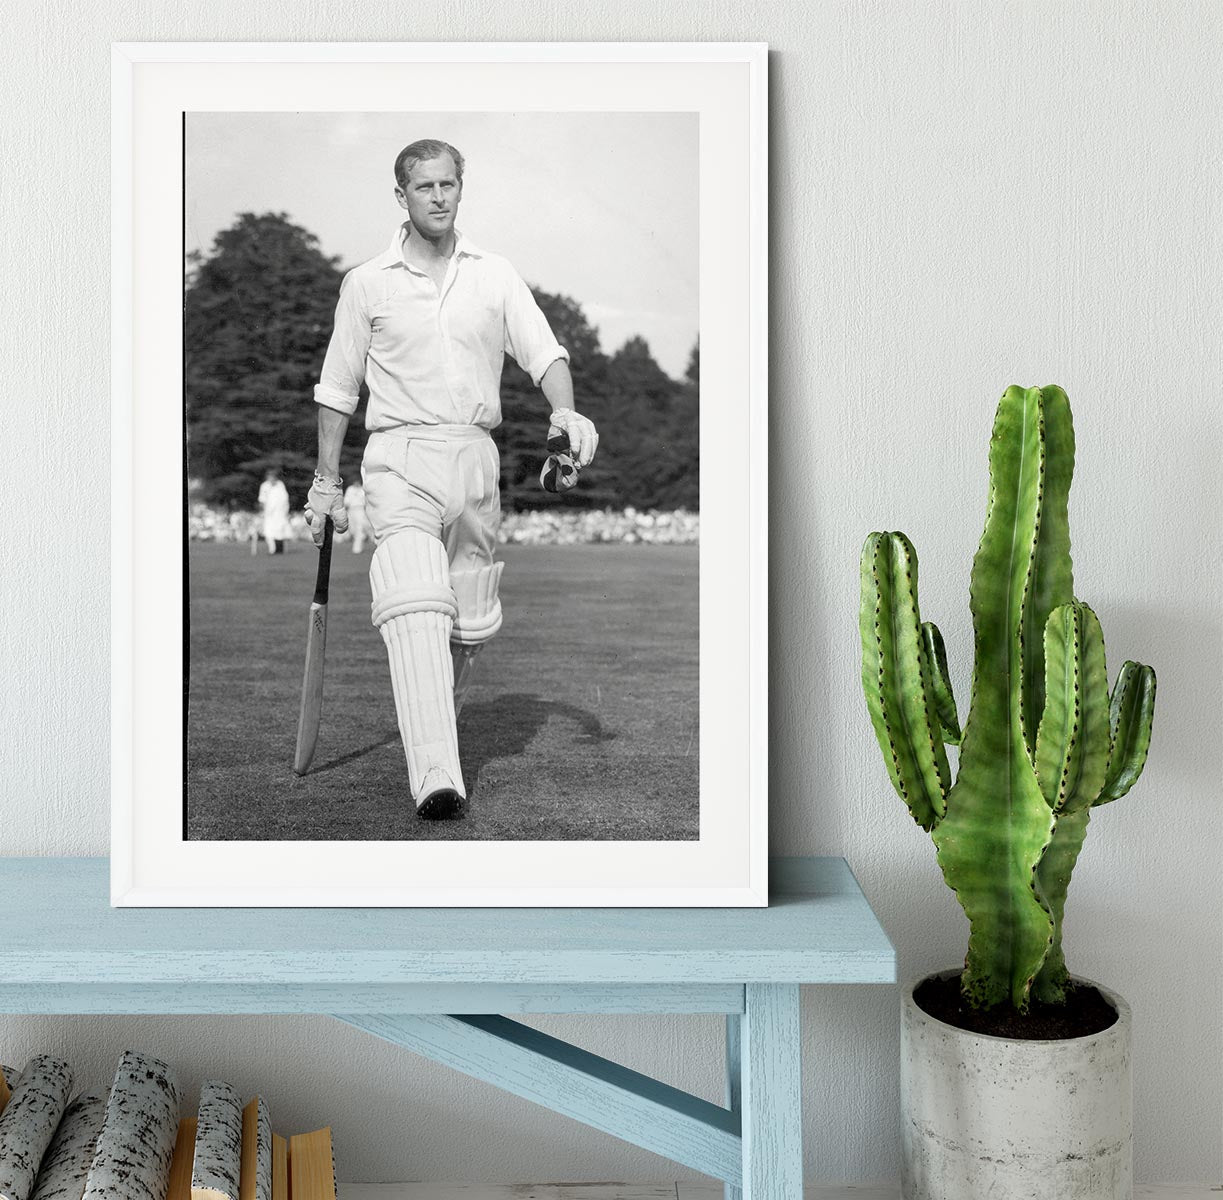 Prince Philip as cricket captain in a charity match Framed Print - Canvas Art Rocks - 5